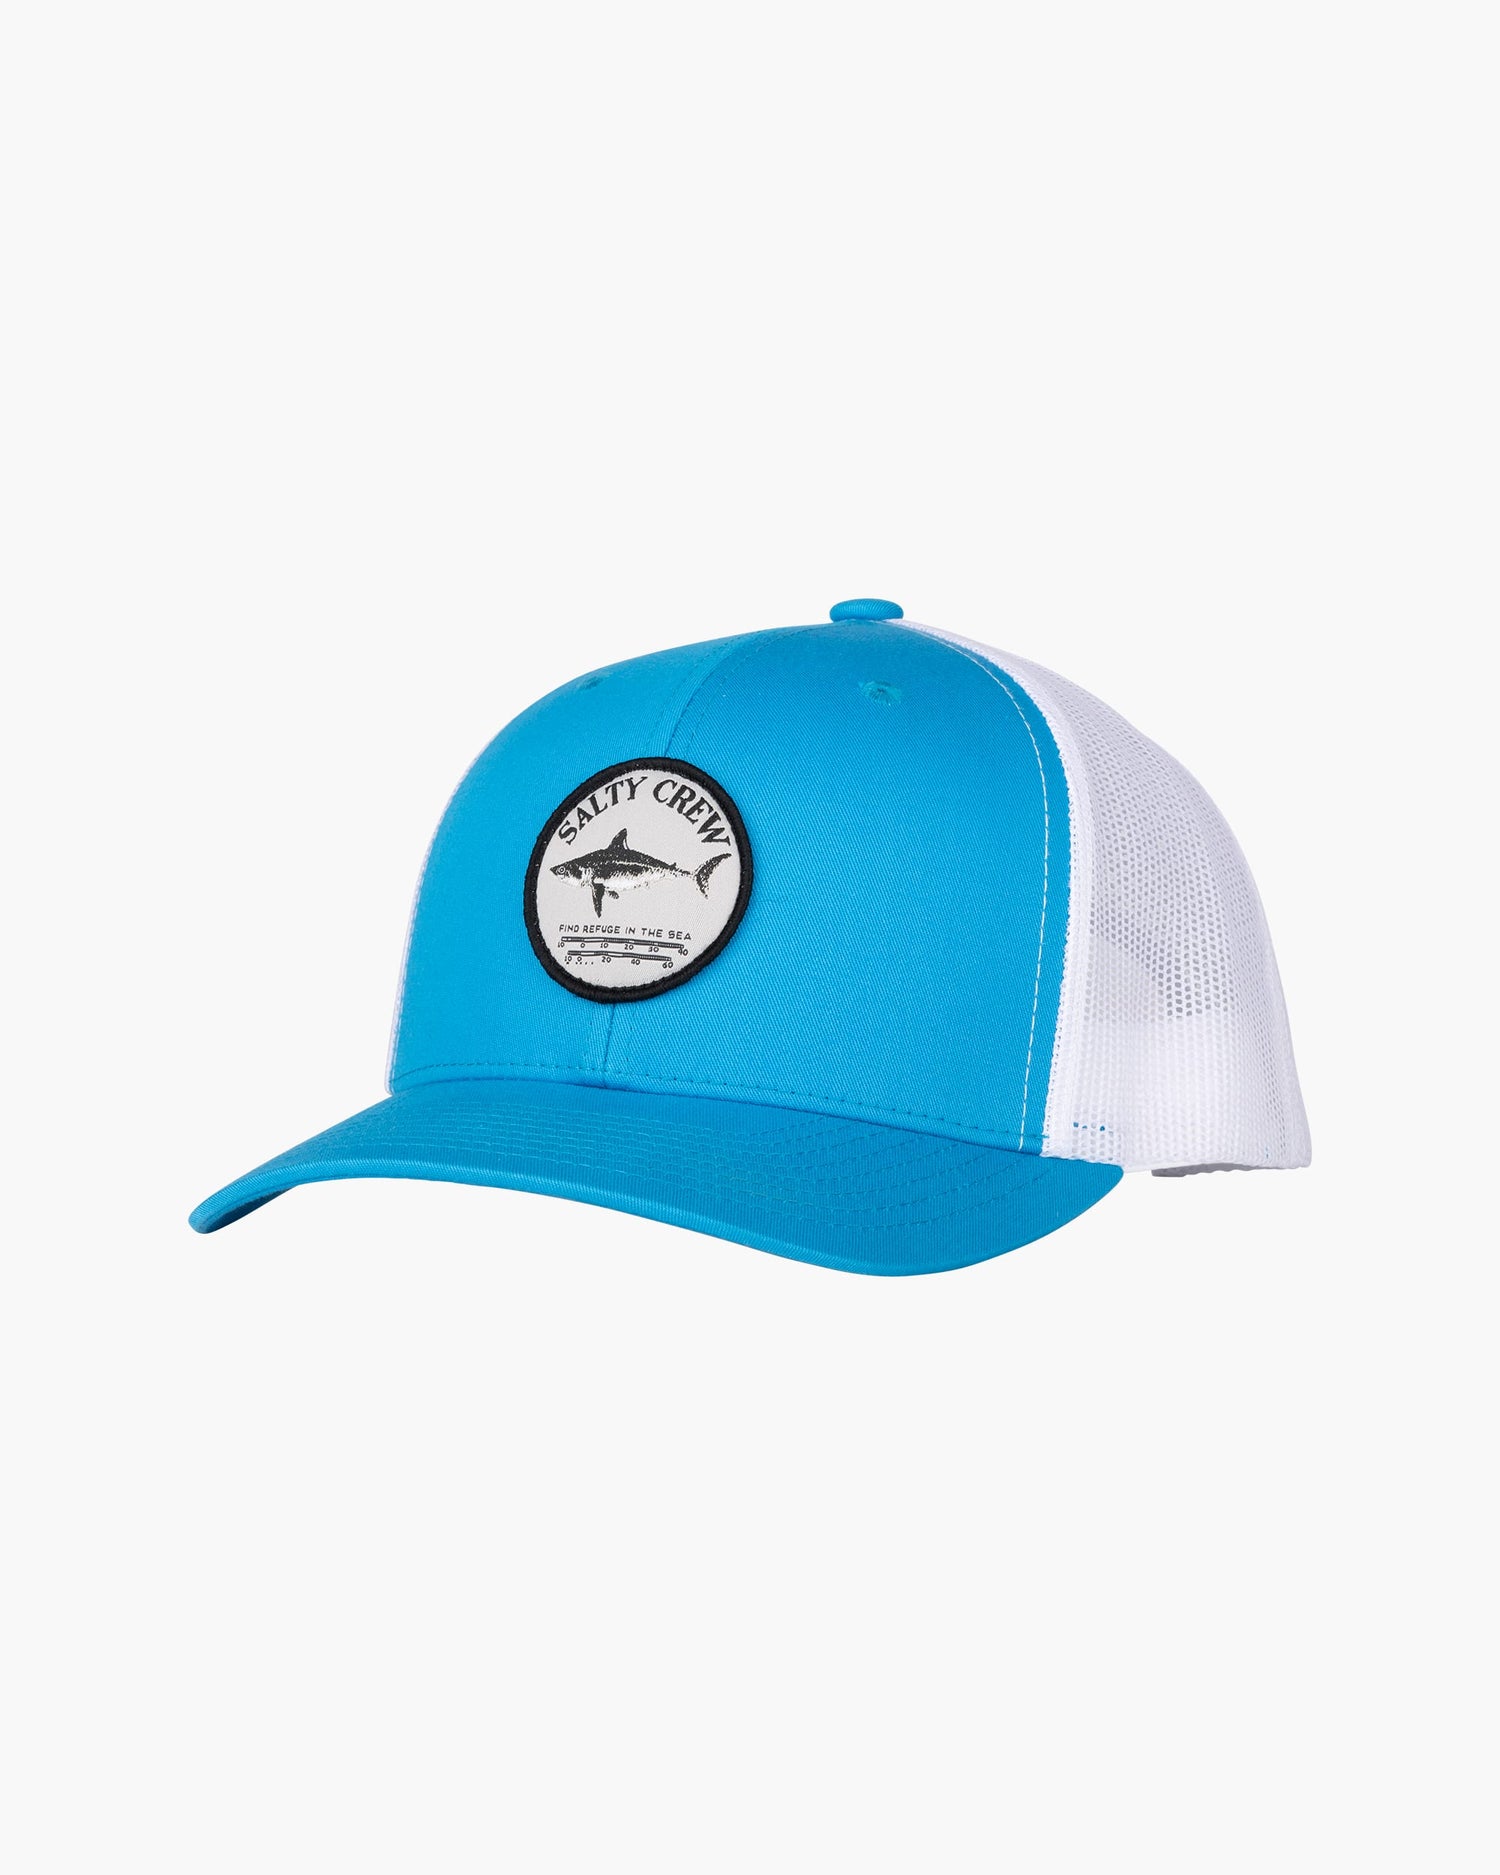 Salty crew HATS BRUCE TRUCKER - Turquoise in Turquoise